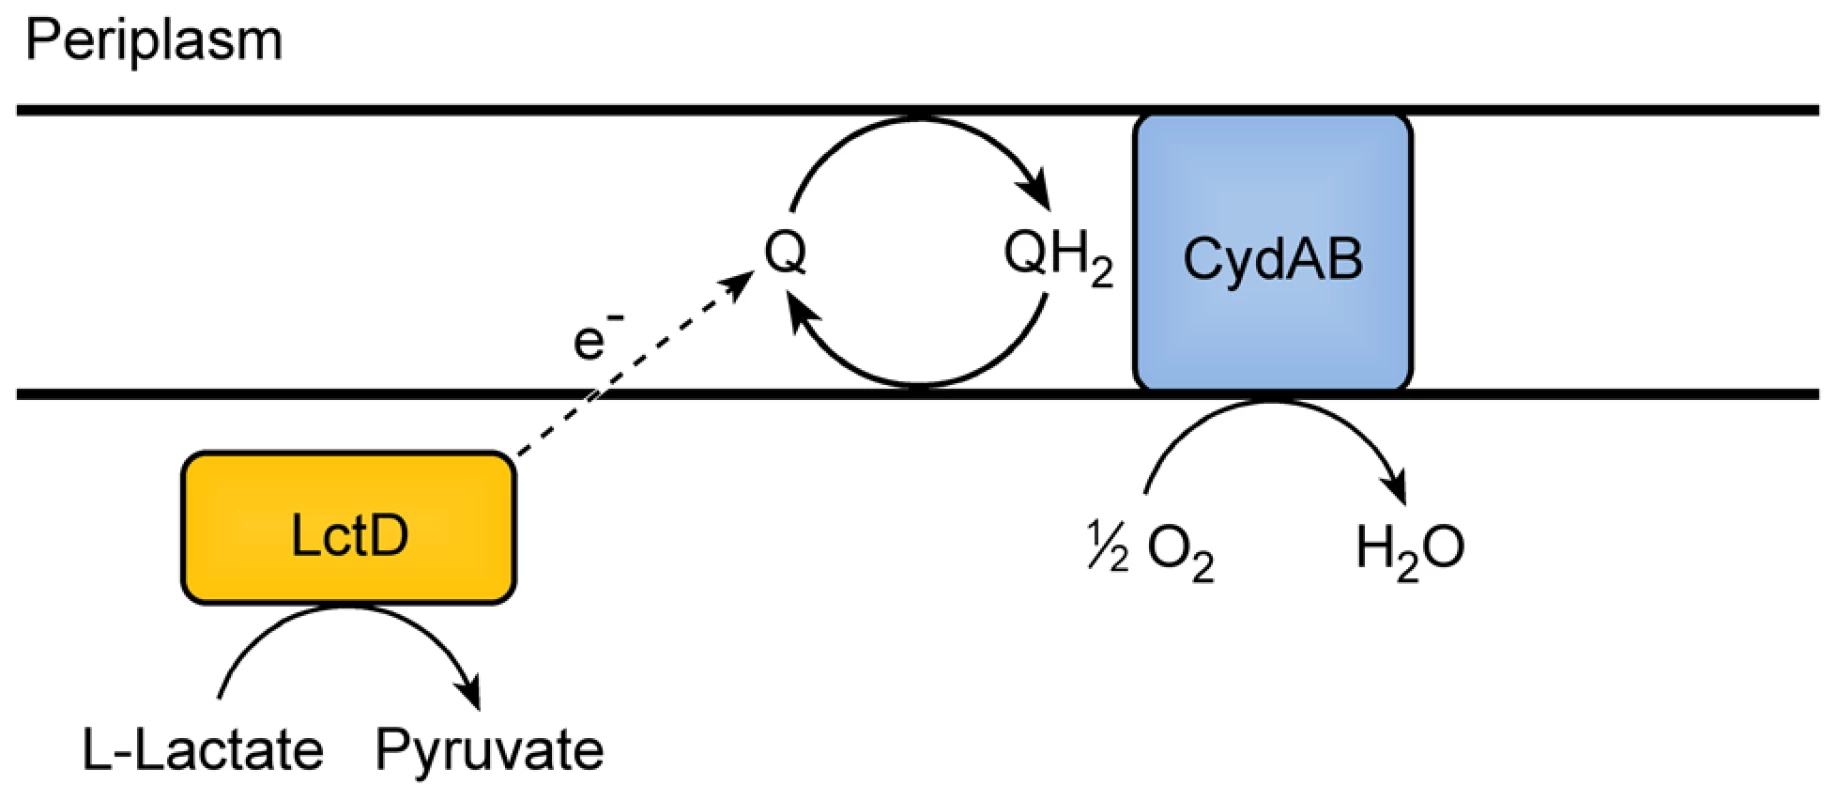 Model for electron transport during L-lactate oxidation in <i>A. actinomycetemcomitans</i>.